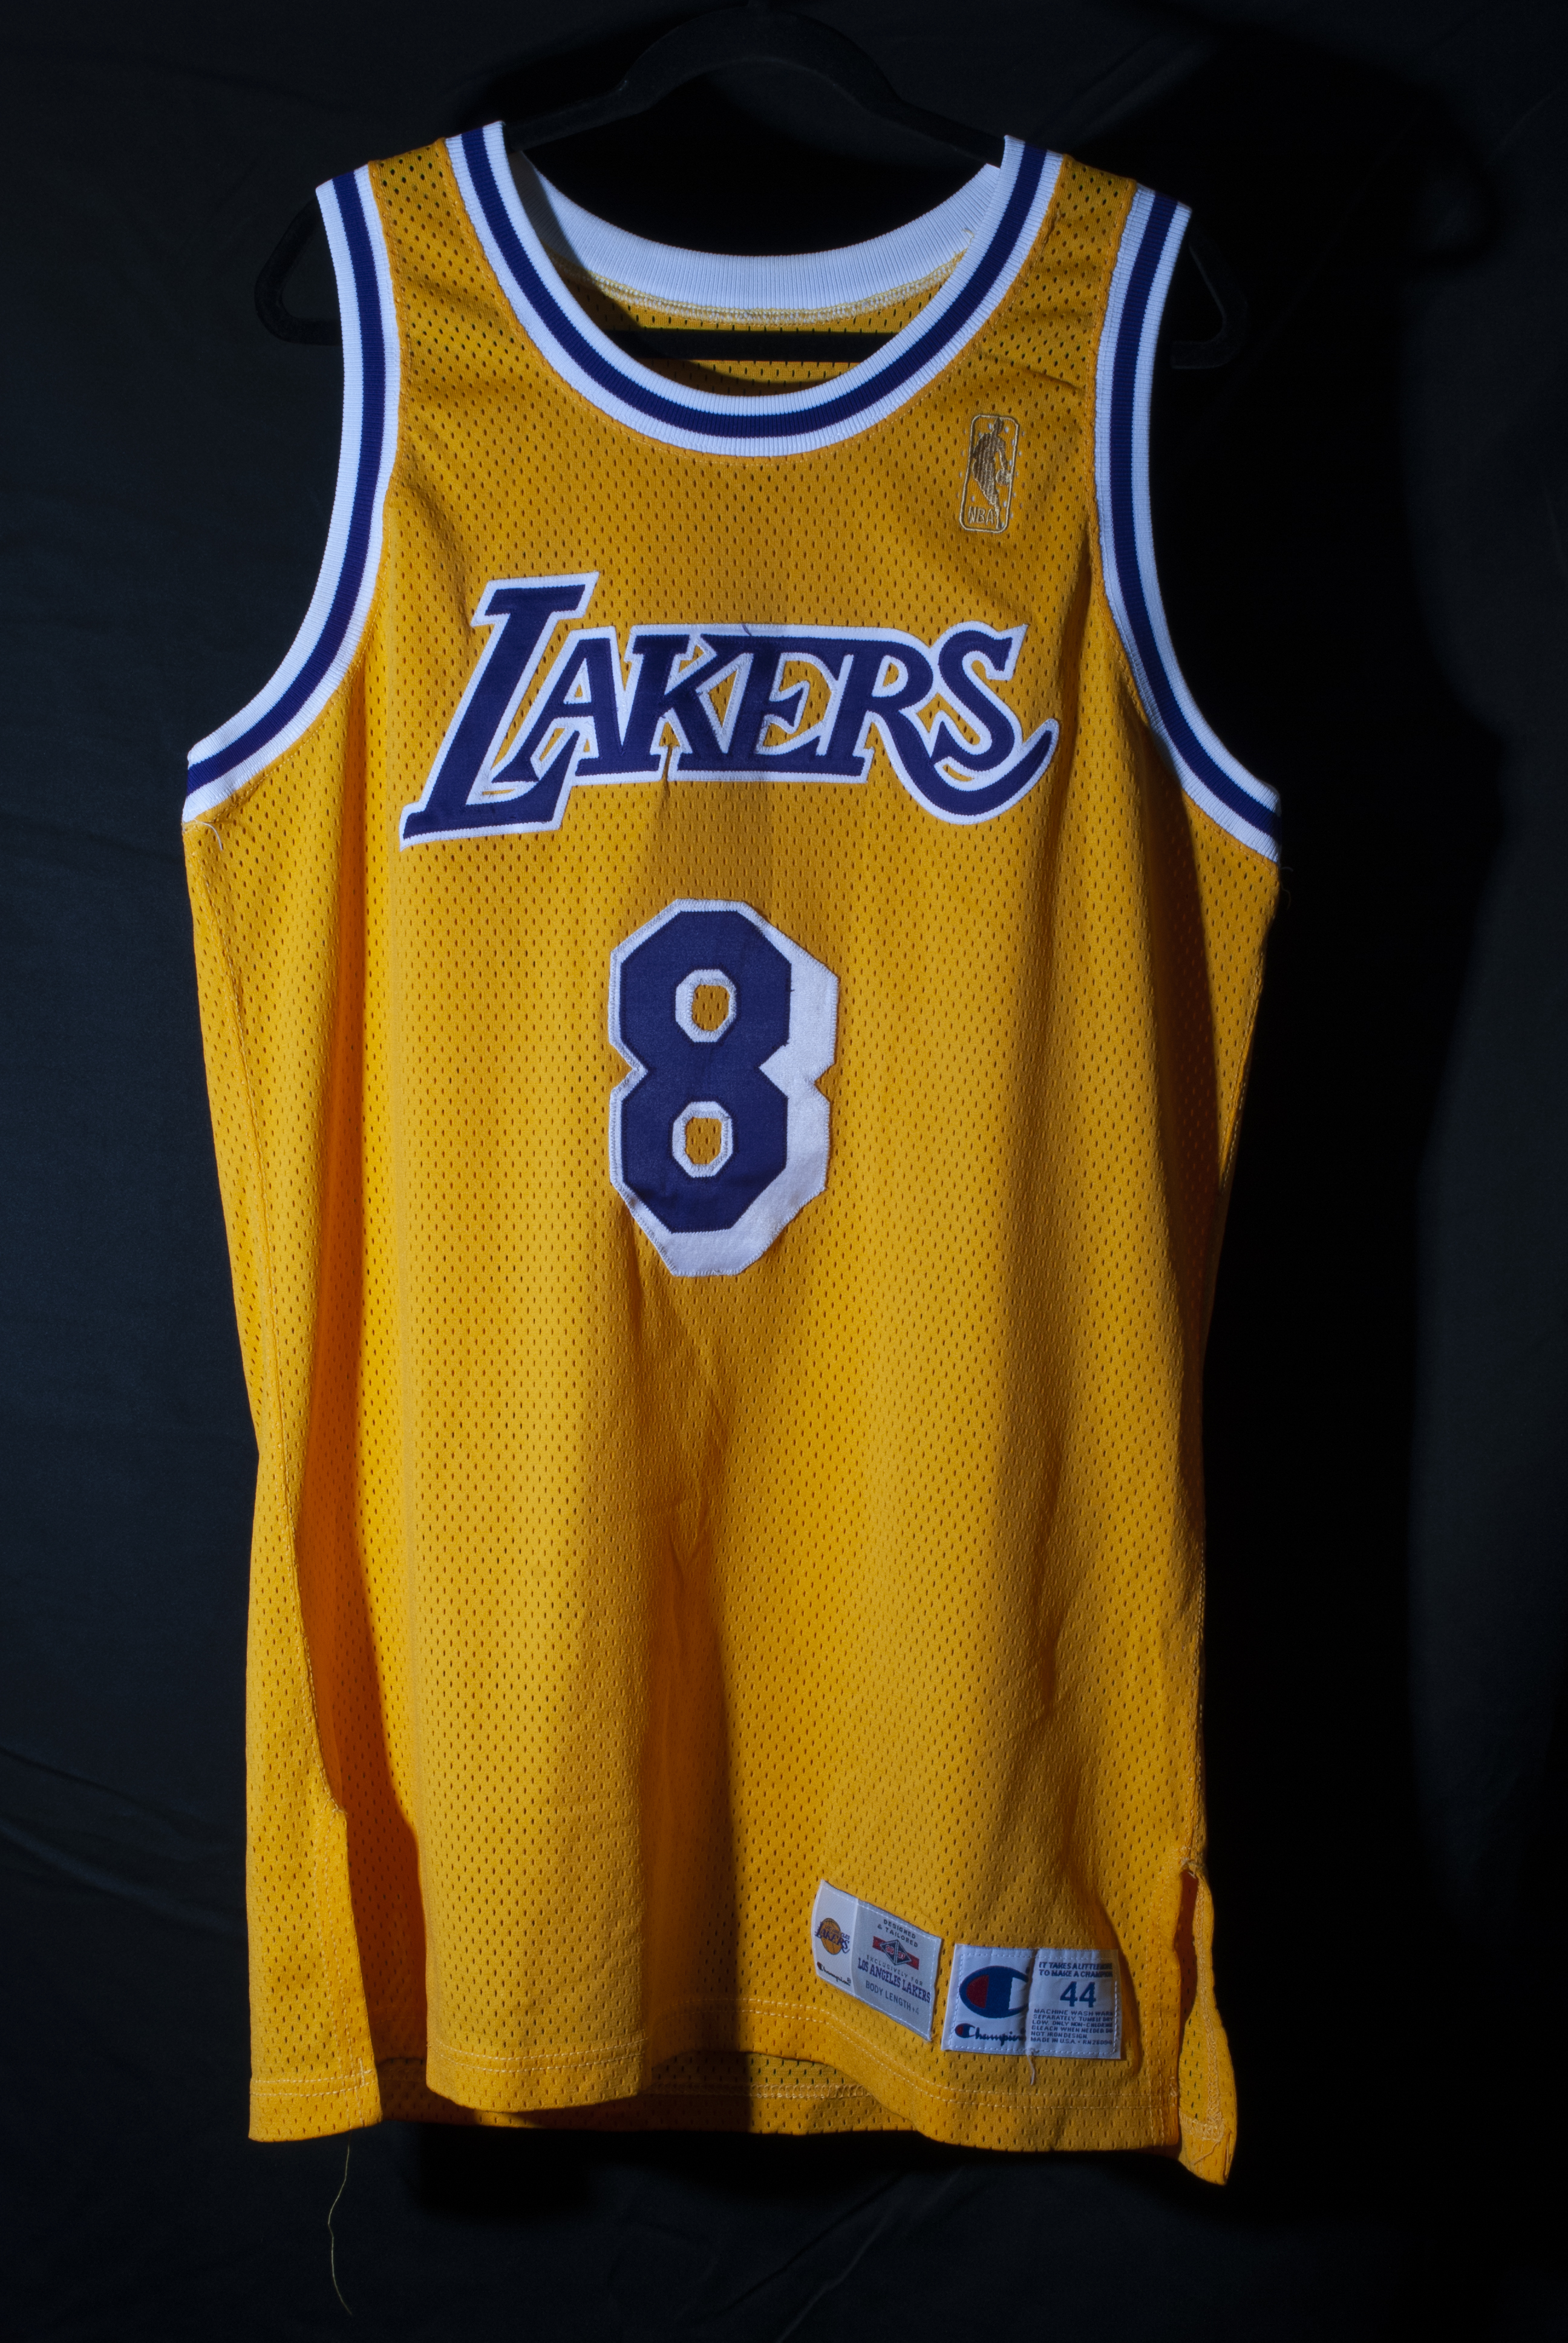 Showpieces Sports Kobe Bryant Rookie Signed Authentic 1996-97 Los Angeles Lakers Game Jersey JSA